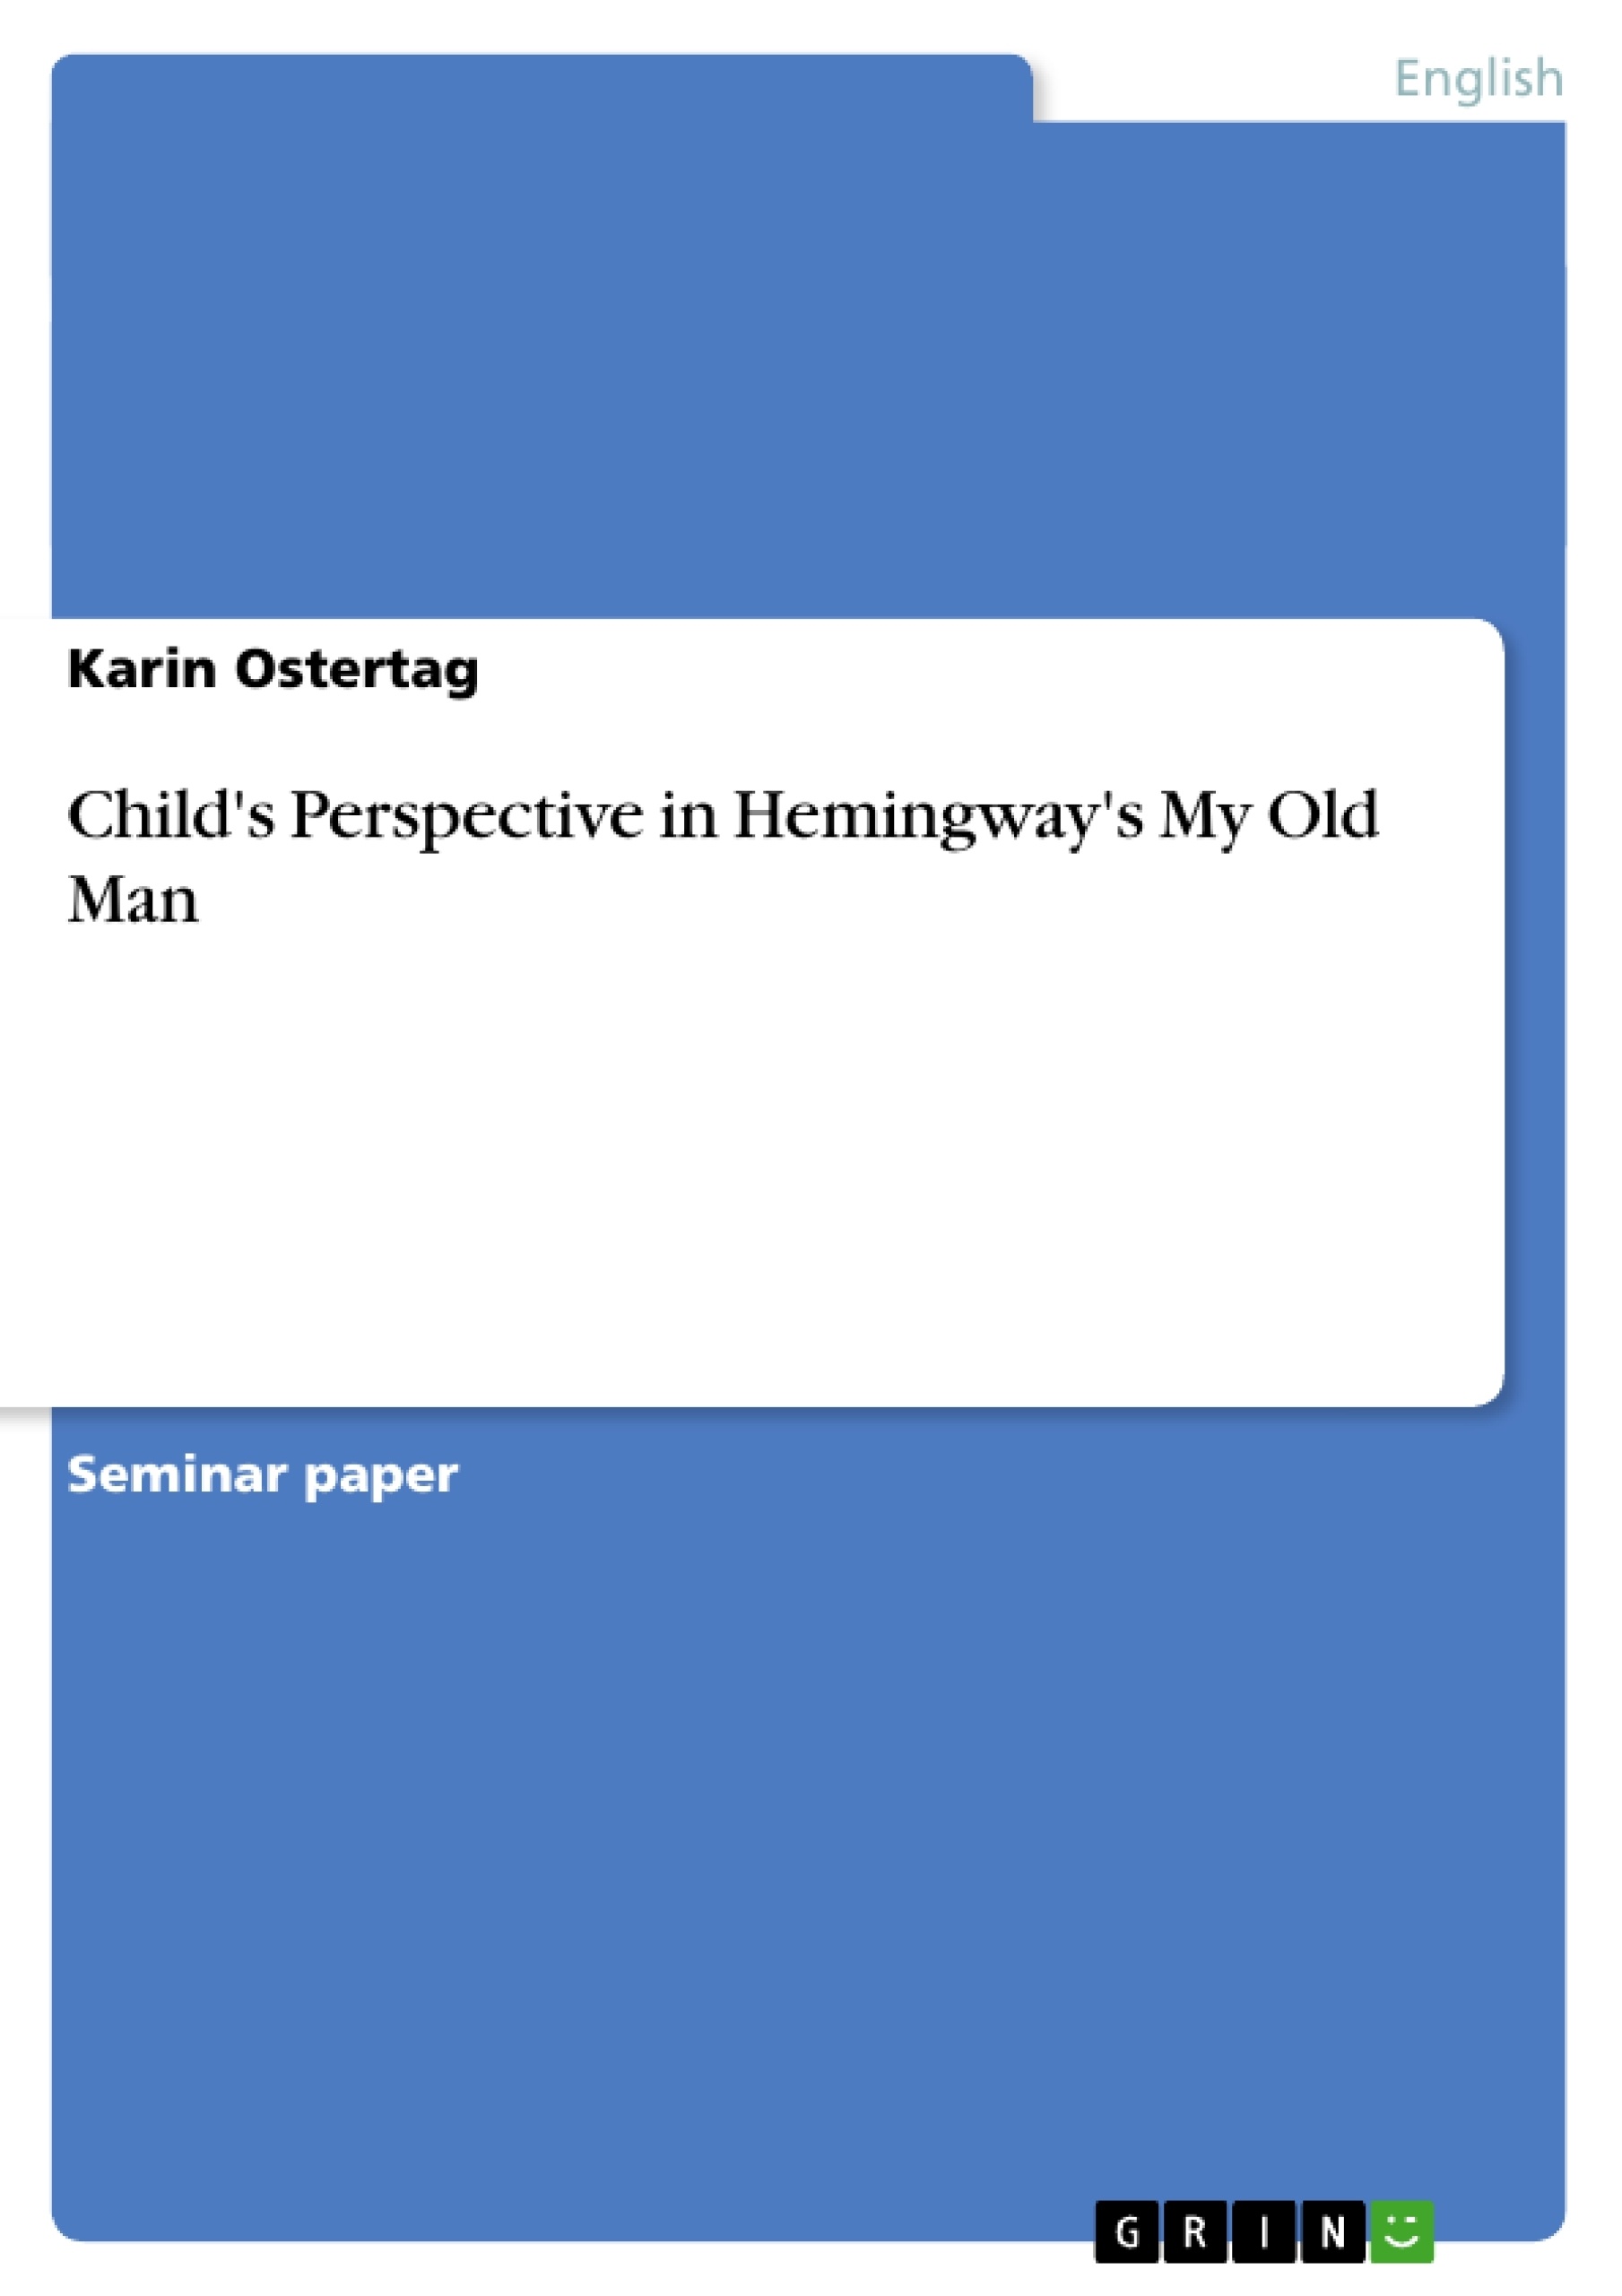 Título: Child's Perspective in Hemingway's  My Old Man